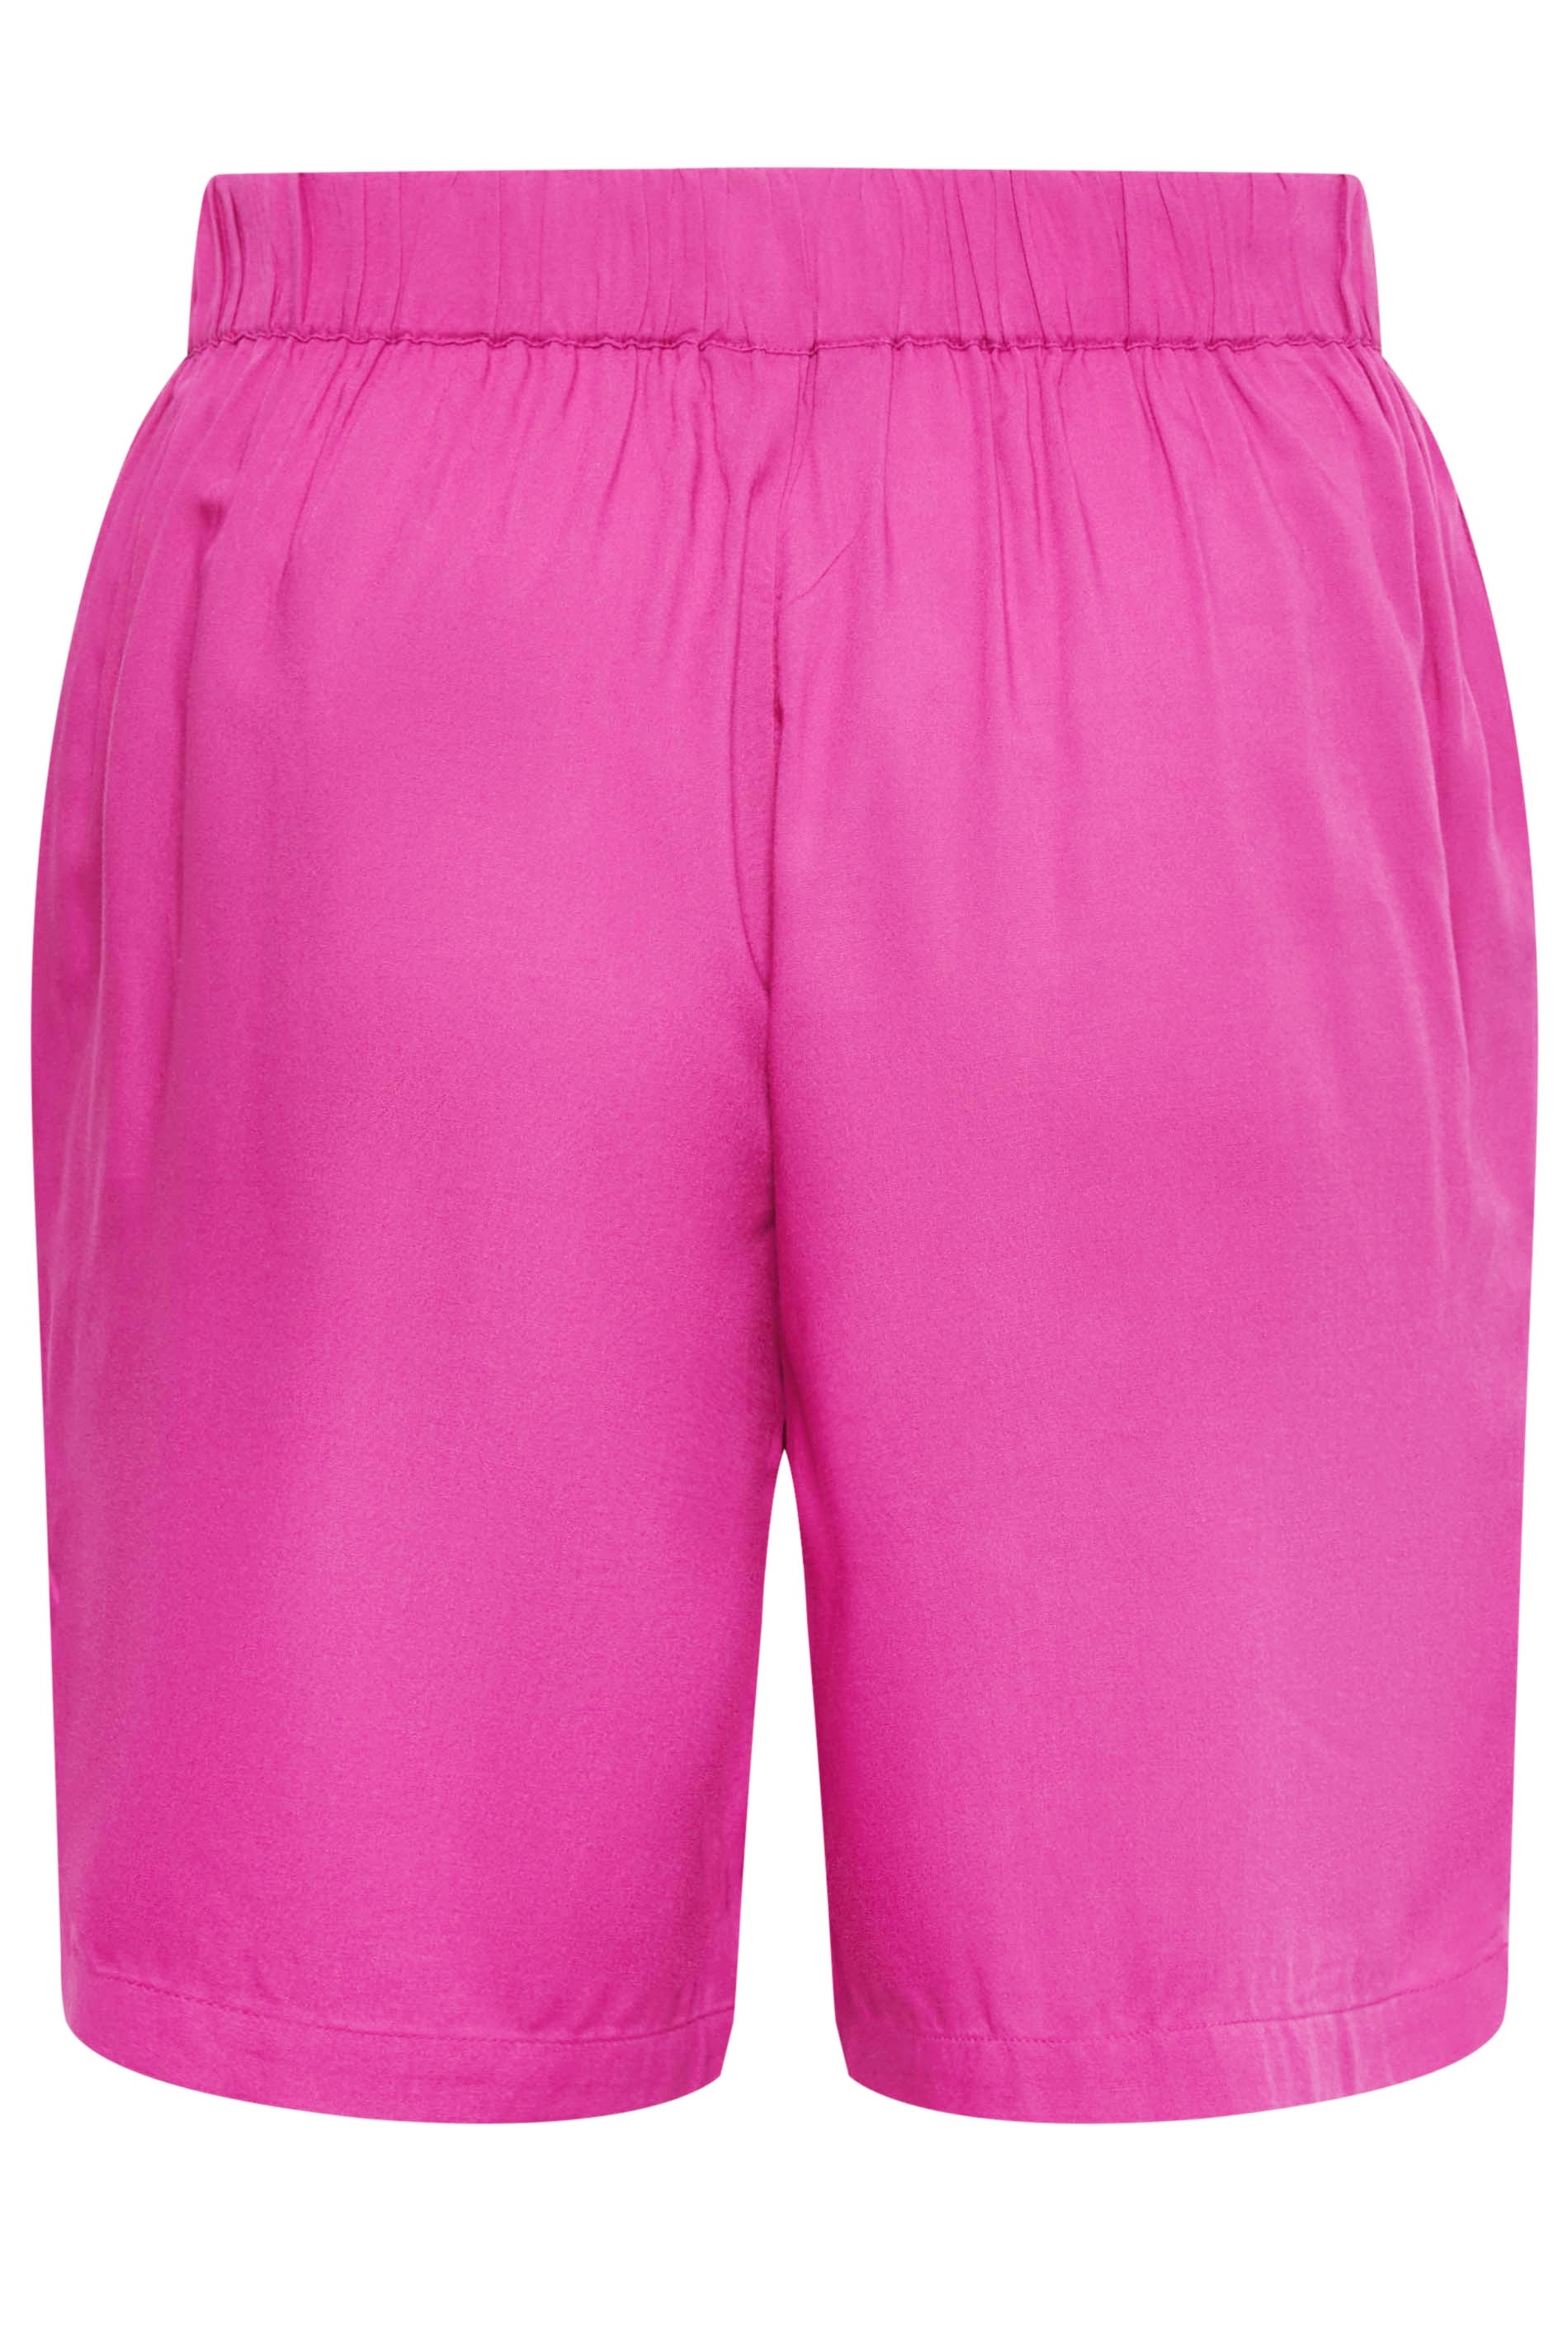 YOURS Curve Plus Size Bright Pink Woven Shorts | Yours Clothing